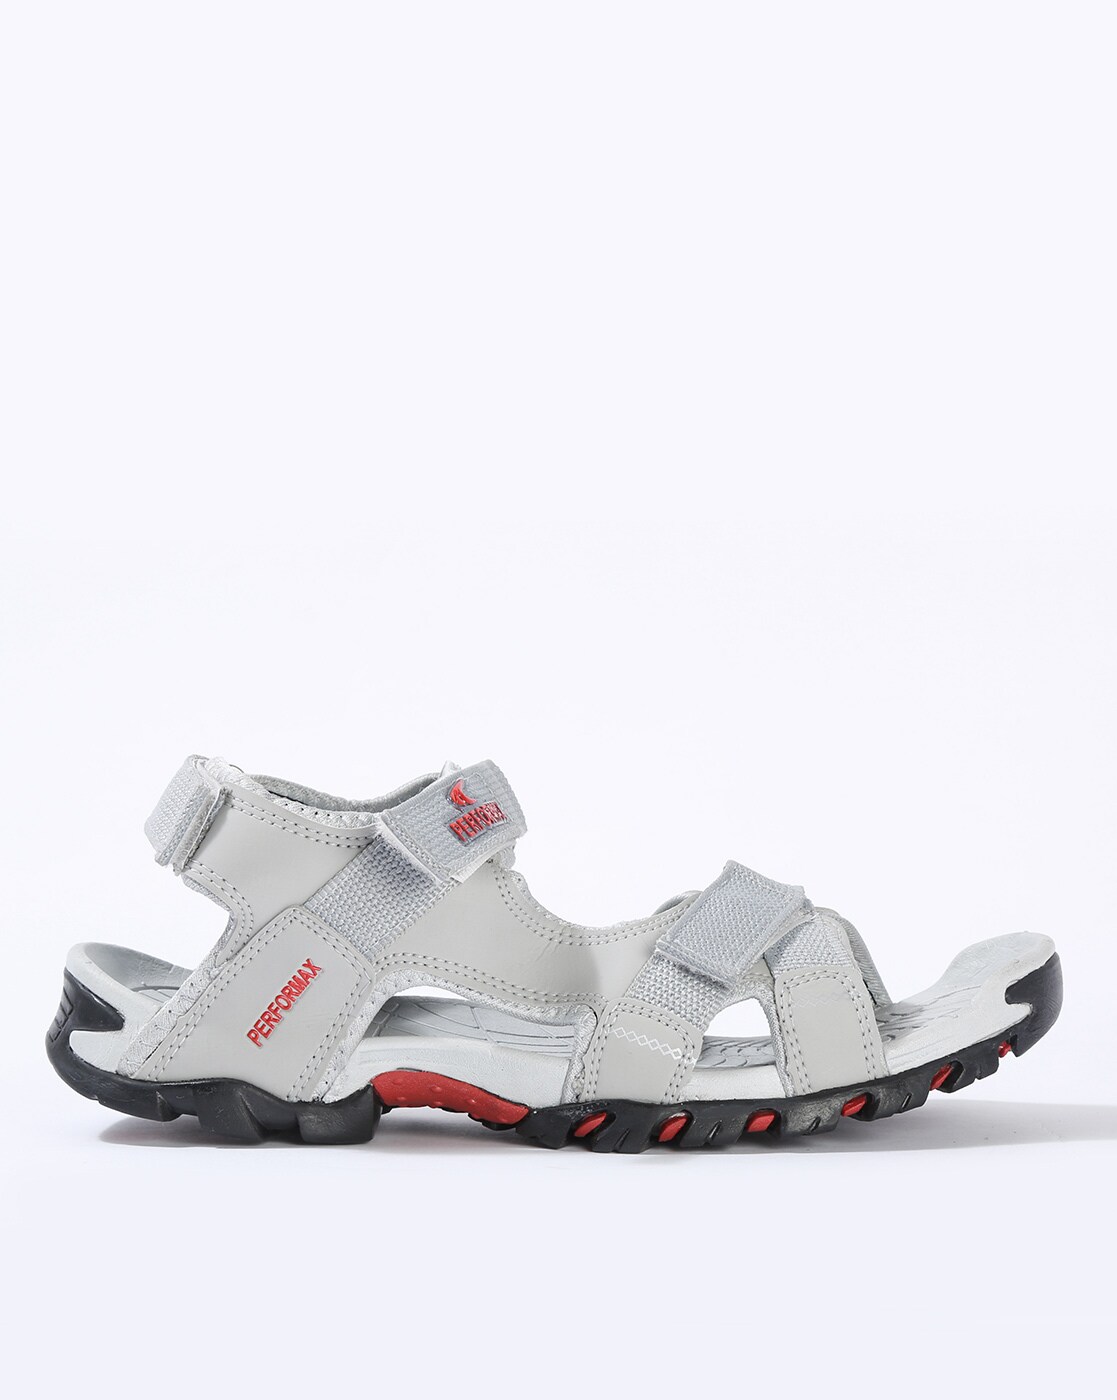 Leather Daily wear Sparx Sandal, Model Name/Number: Ss 468